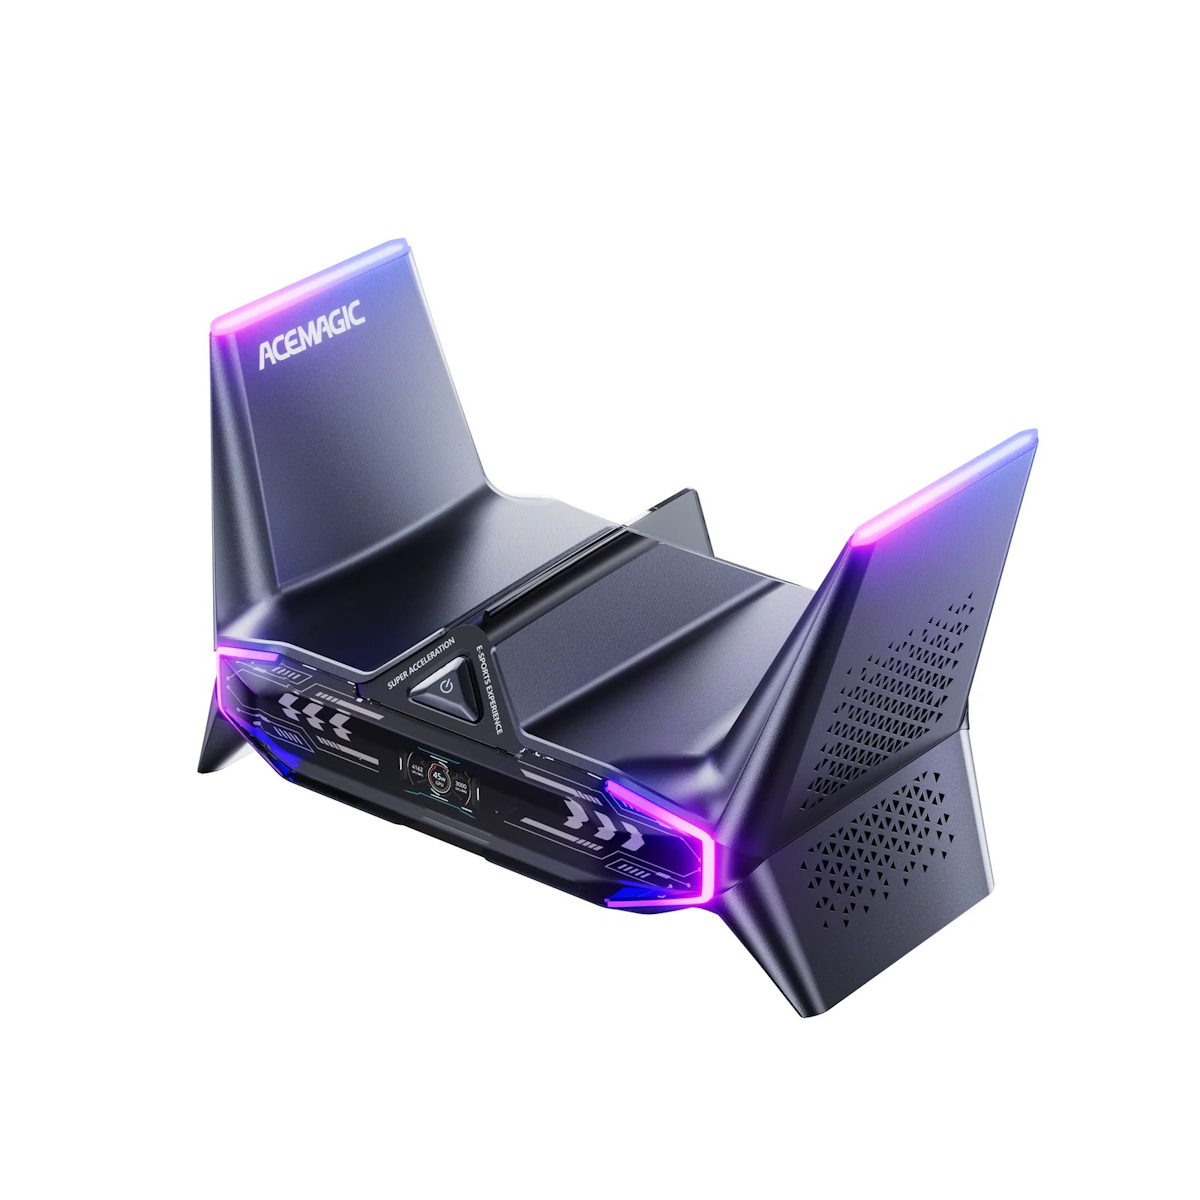 The ACEMAGIC M2A Gaming Mini PC is giving off serious TIE Fighter vibes